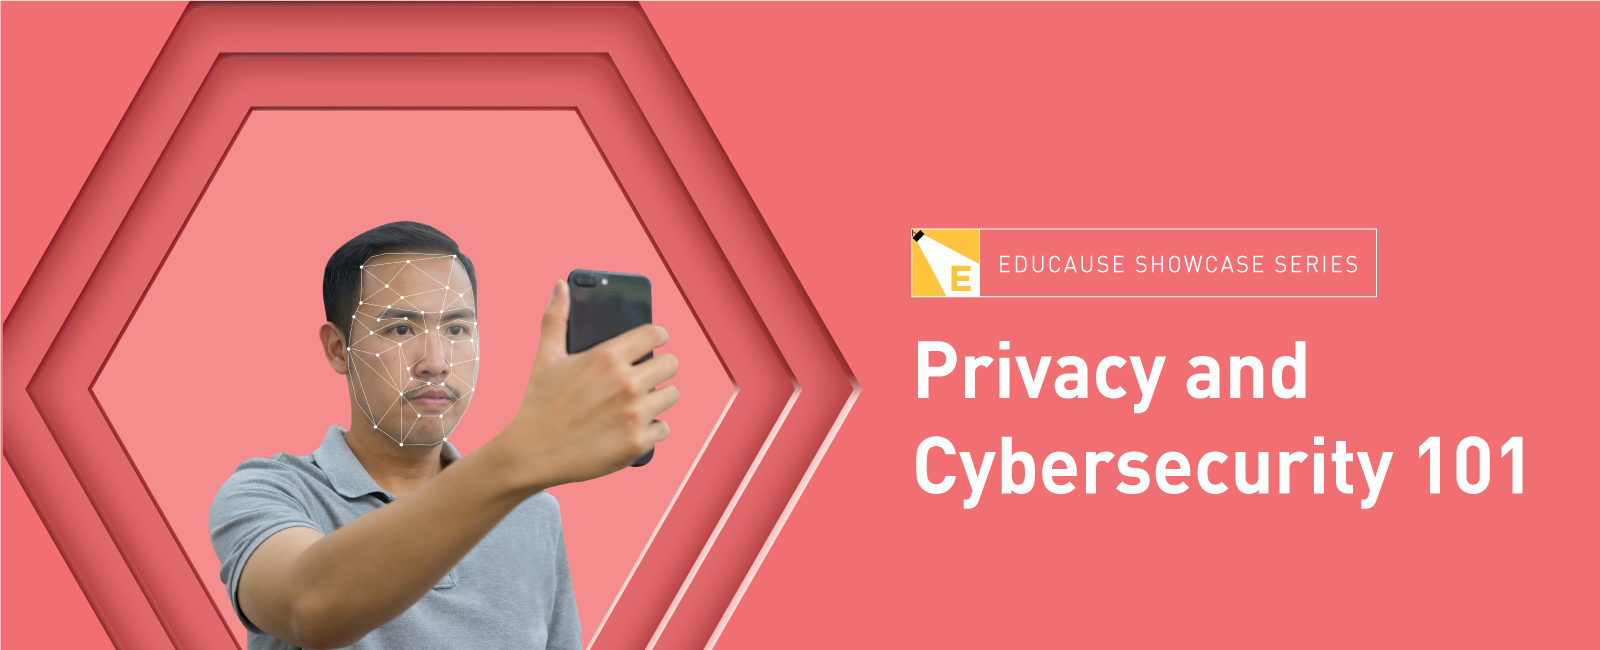 EDUCAUSE SHOWCASE SERIES | Privacy and Cybersecurity 101